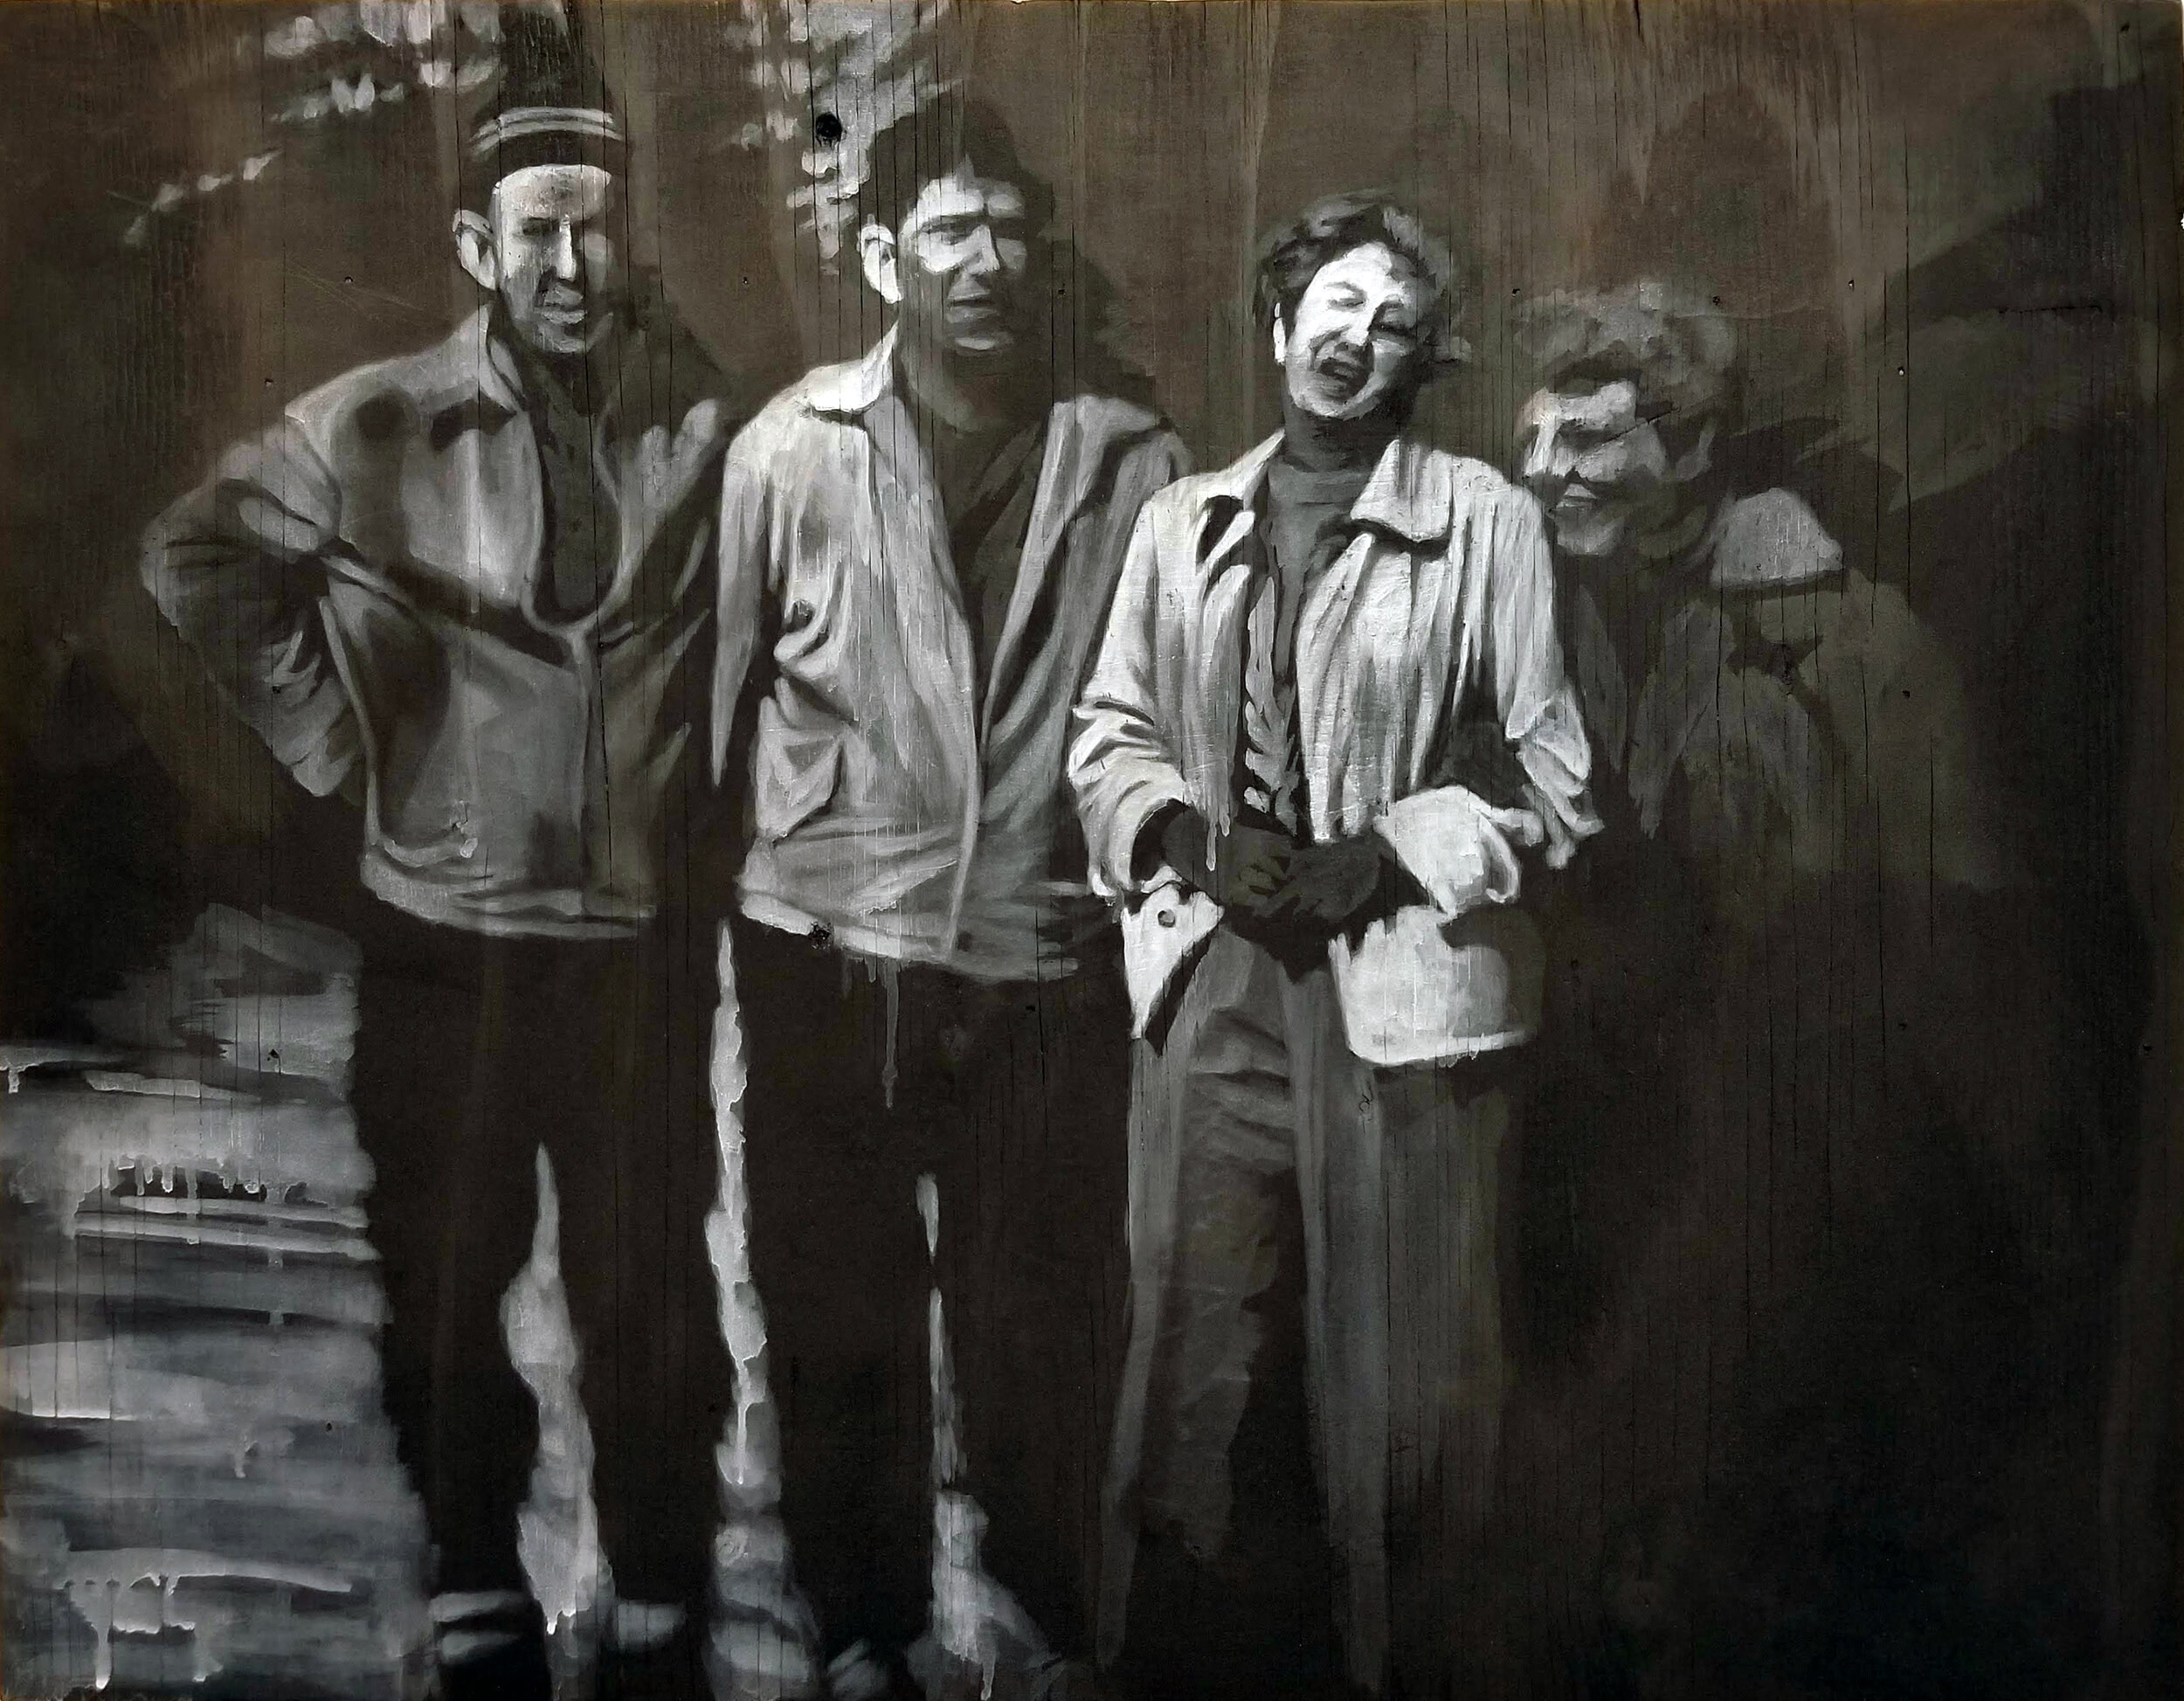 Pazderka - Friends - 26x20 - Ash, charcoal and oil on burned panel - $1500.jpg